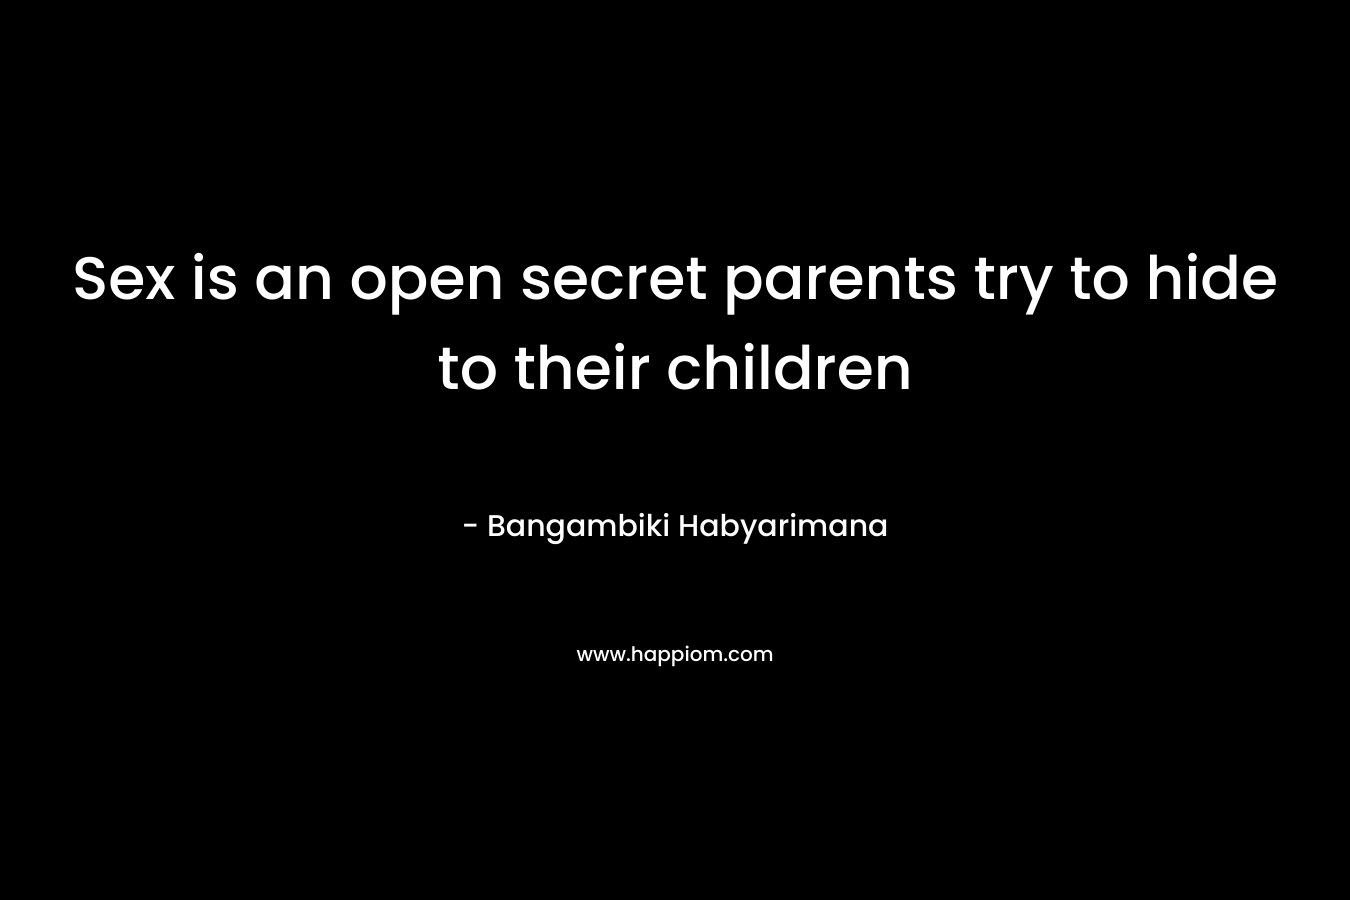 Sex is an open secret parents try to hide to their children